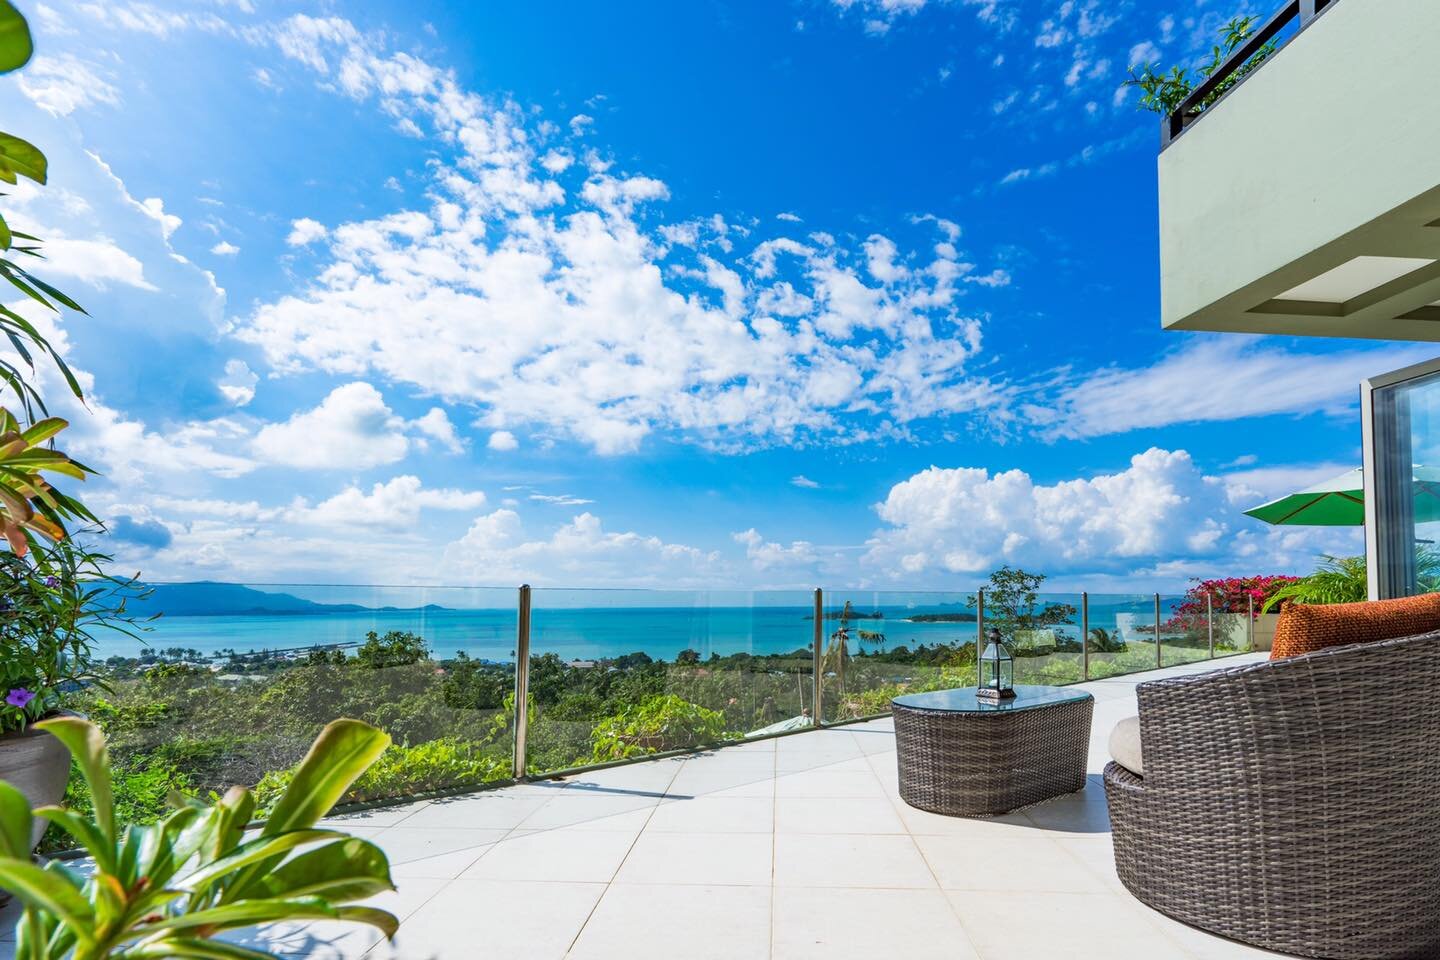 While large parts of the world are shifting into colder, darker and wetter days, the sun keeps shining here in Koh Samui. The average daily temperature this week is 29 degrees Celsius! 

Are you dreaming of warmth, sunshine and blue skies? Can you pi